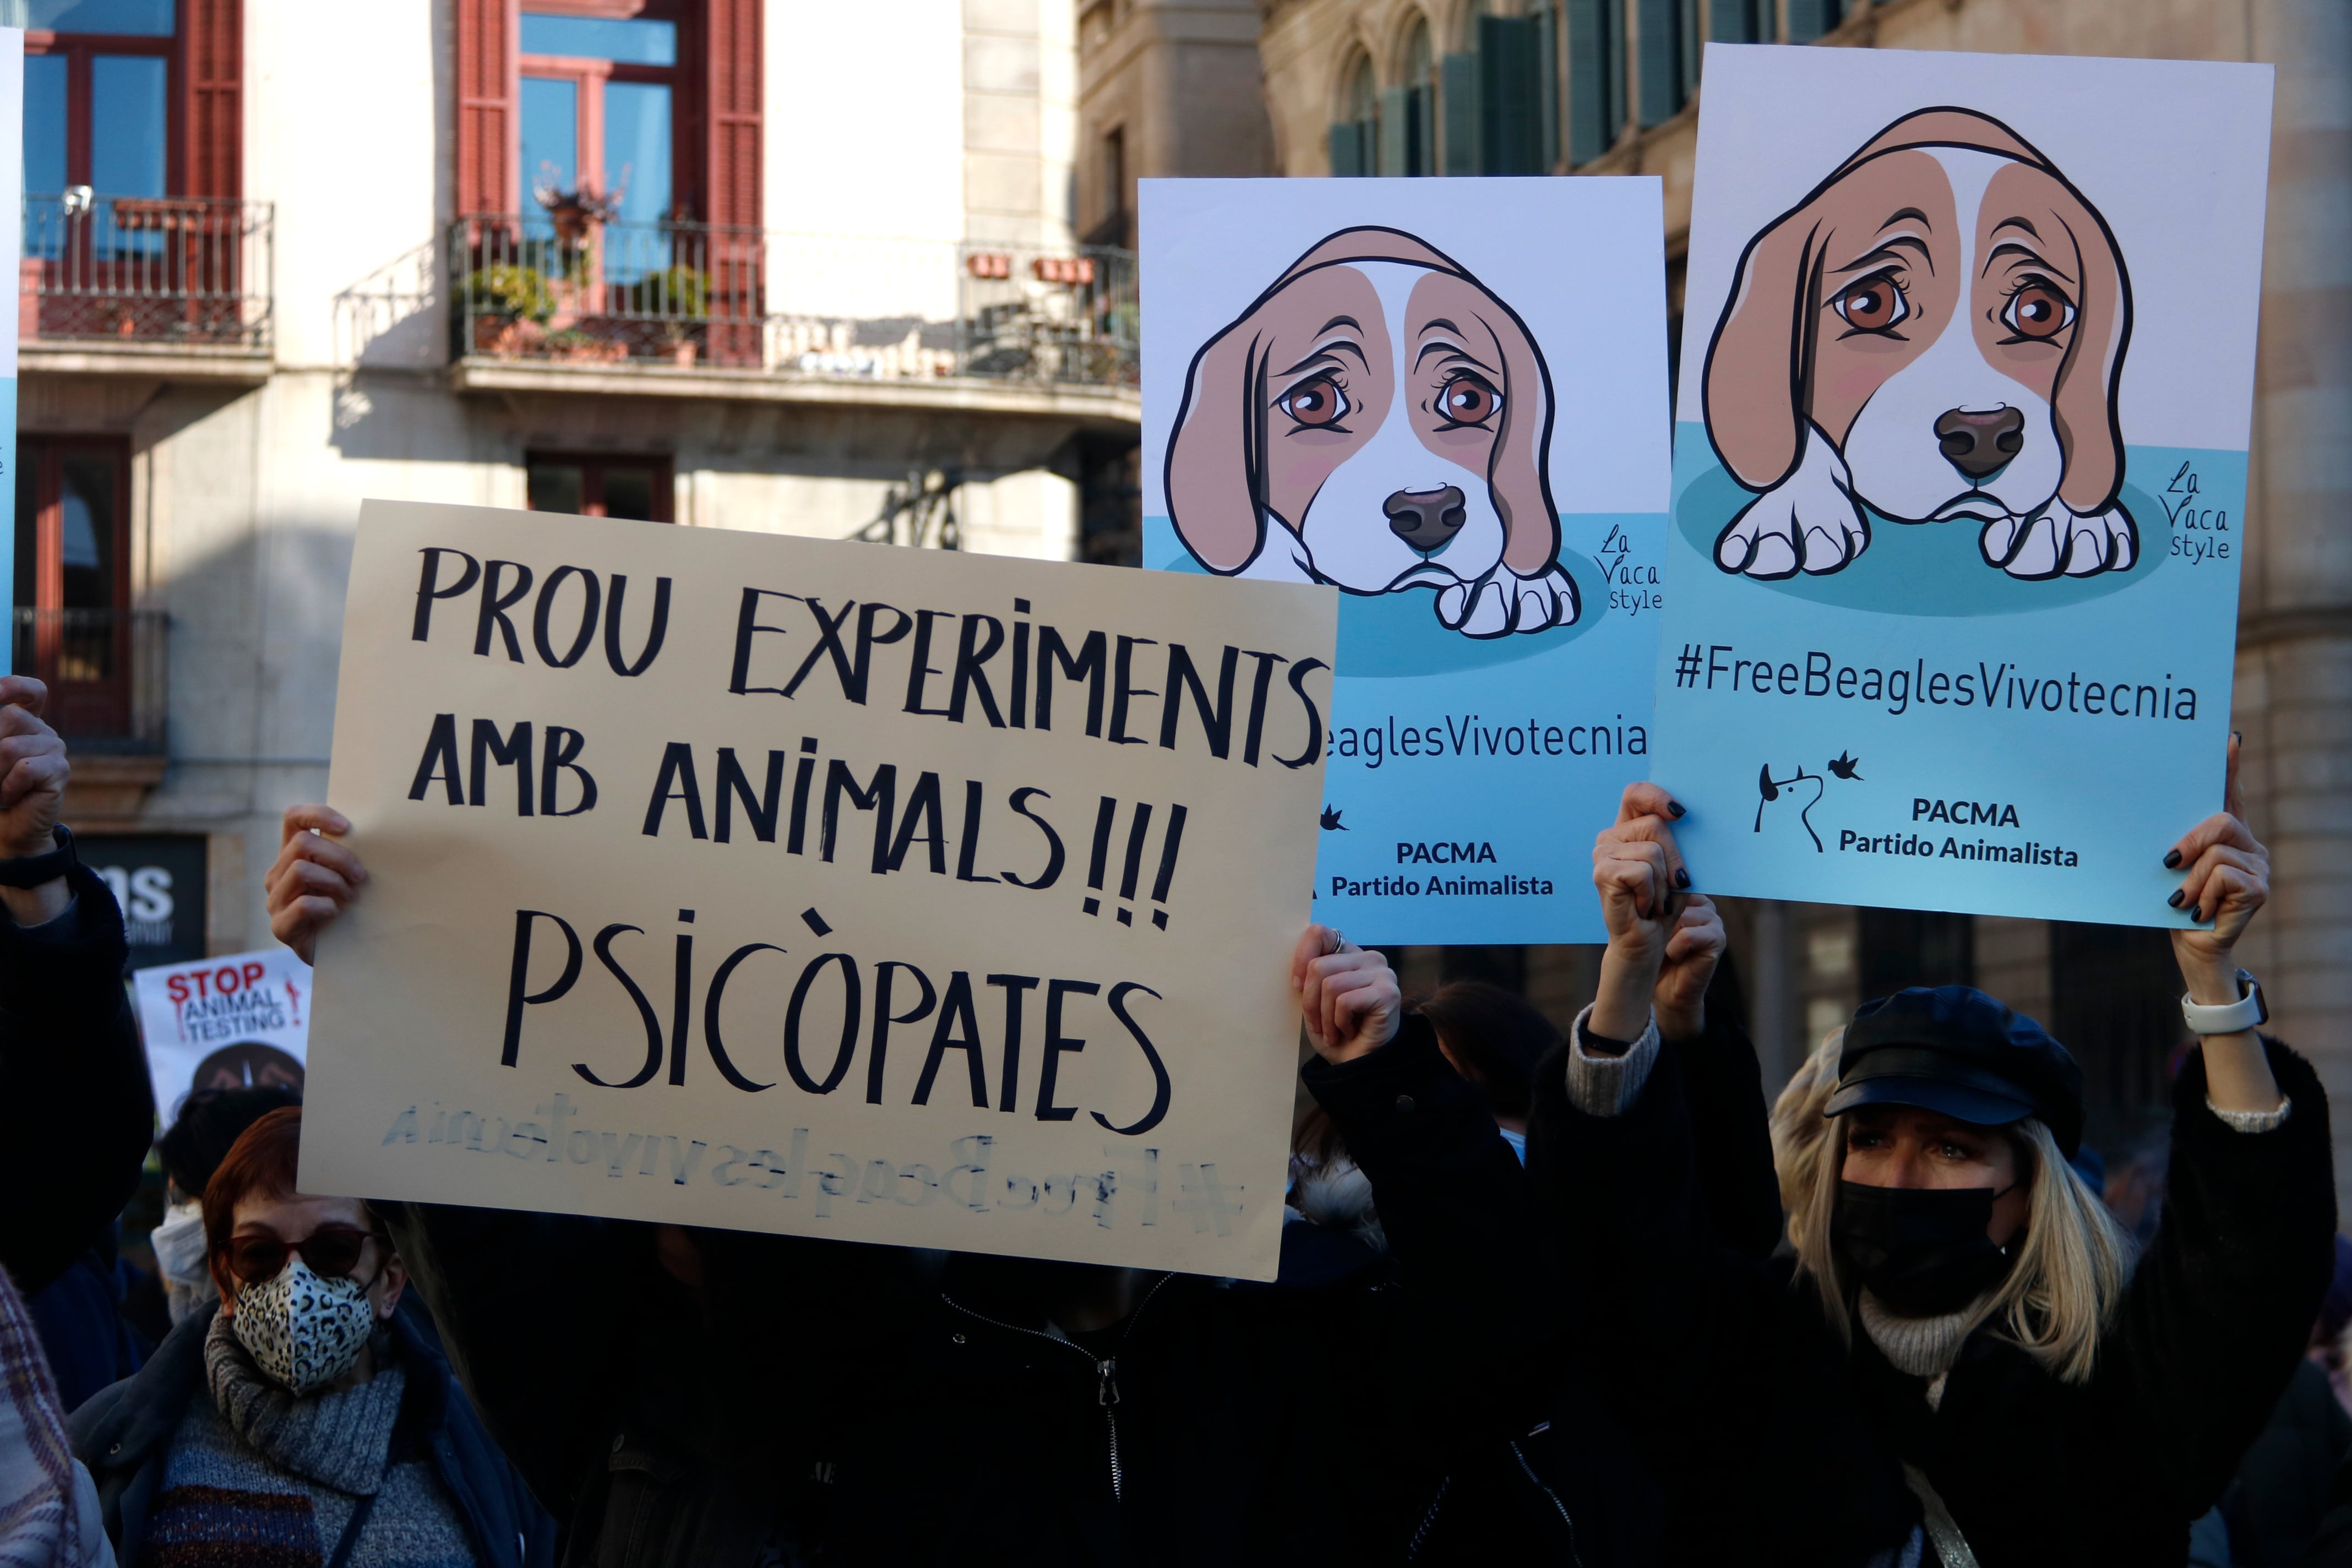 Hundreds of people gathered at Plaça Sant Jaume on January 22, 2022 to protest animal testing (by Blanca Blay)